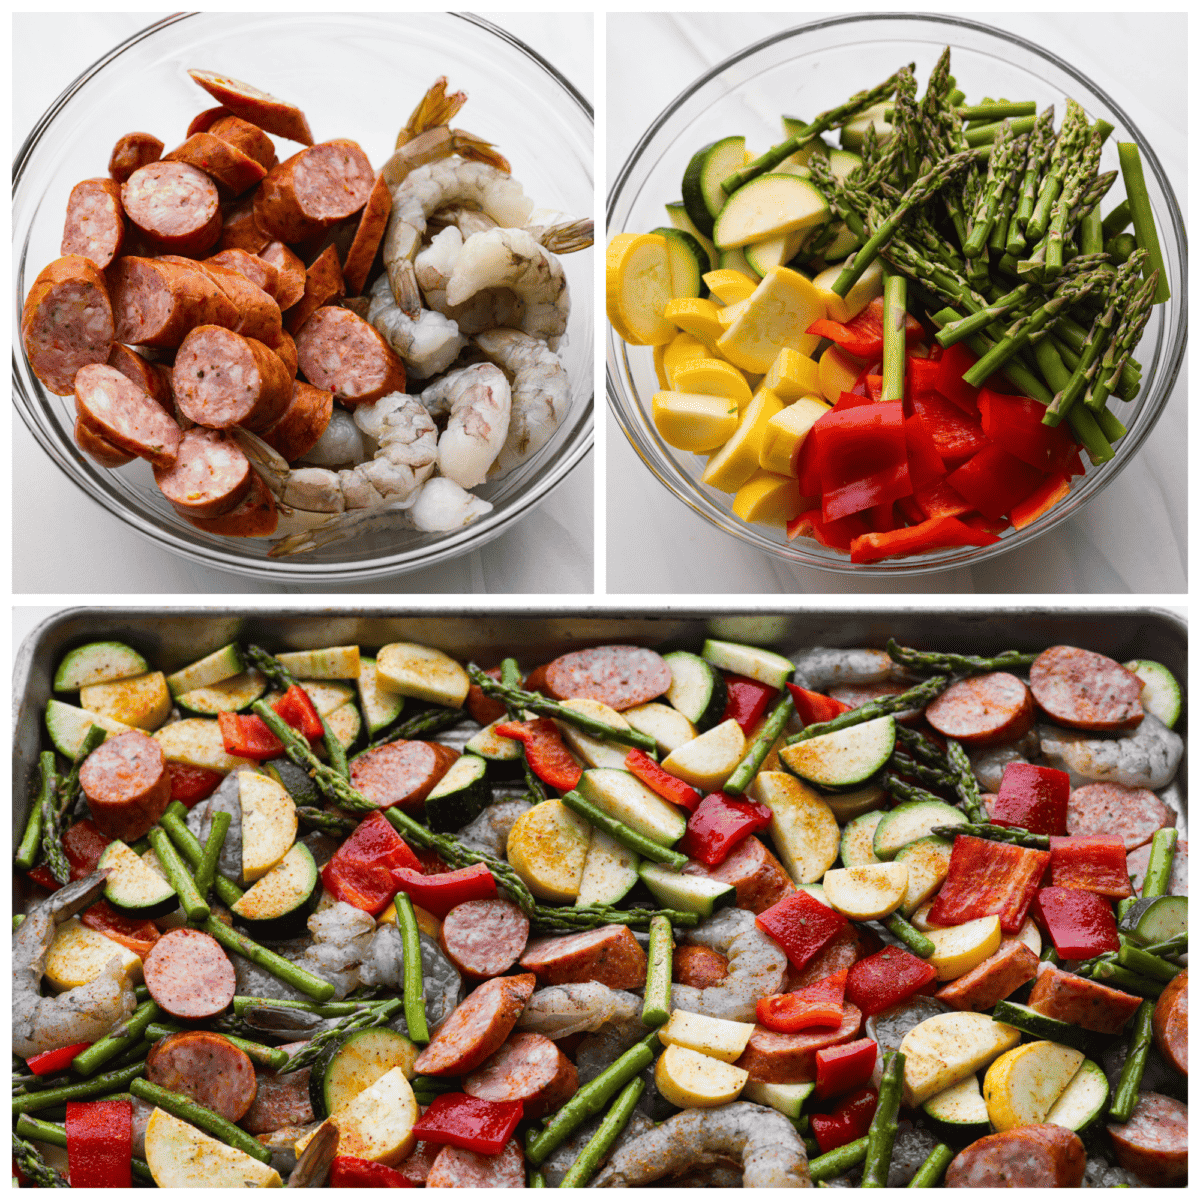 First photo of sliced sausage and raw shrimp in a bowl. Second photo of the vegetables cut in a bowl. Third photo of the ingredients seasoned with cajun seasoning and placed on a sheet pan ready to be baked.